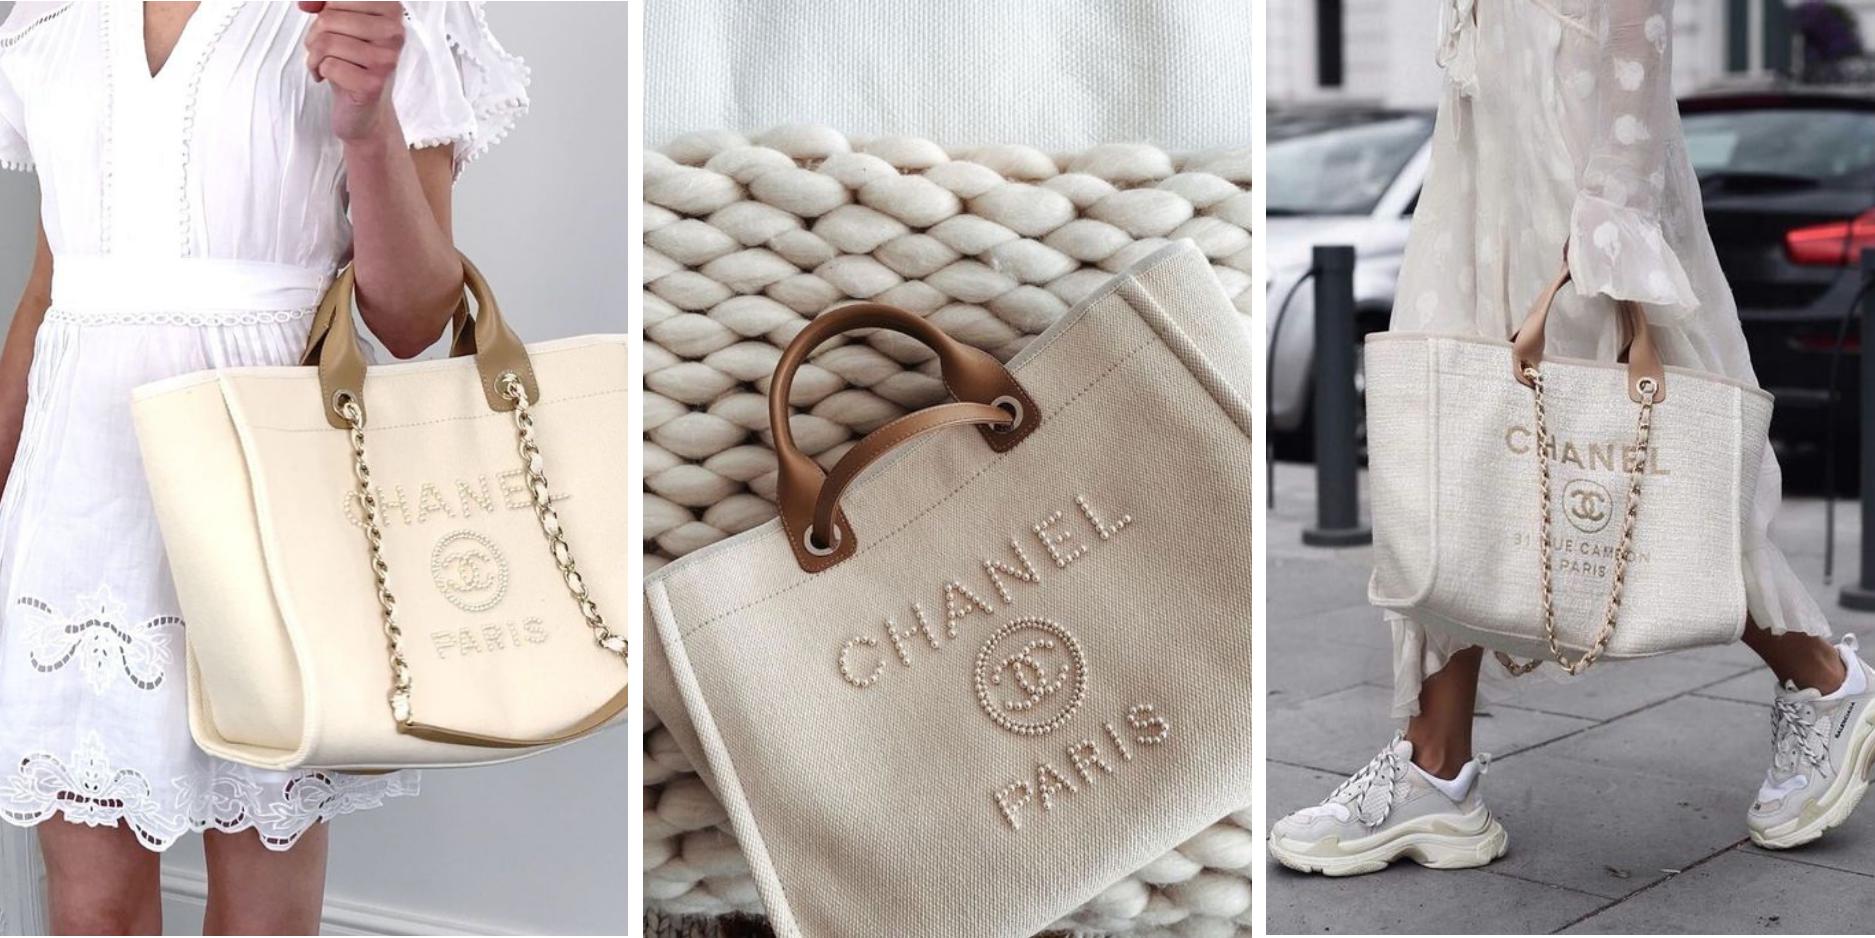 The Complete Guide To The Chanel Deauville Tote Bag Handbagholic